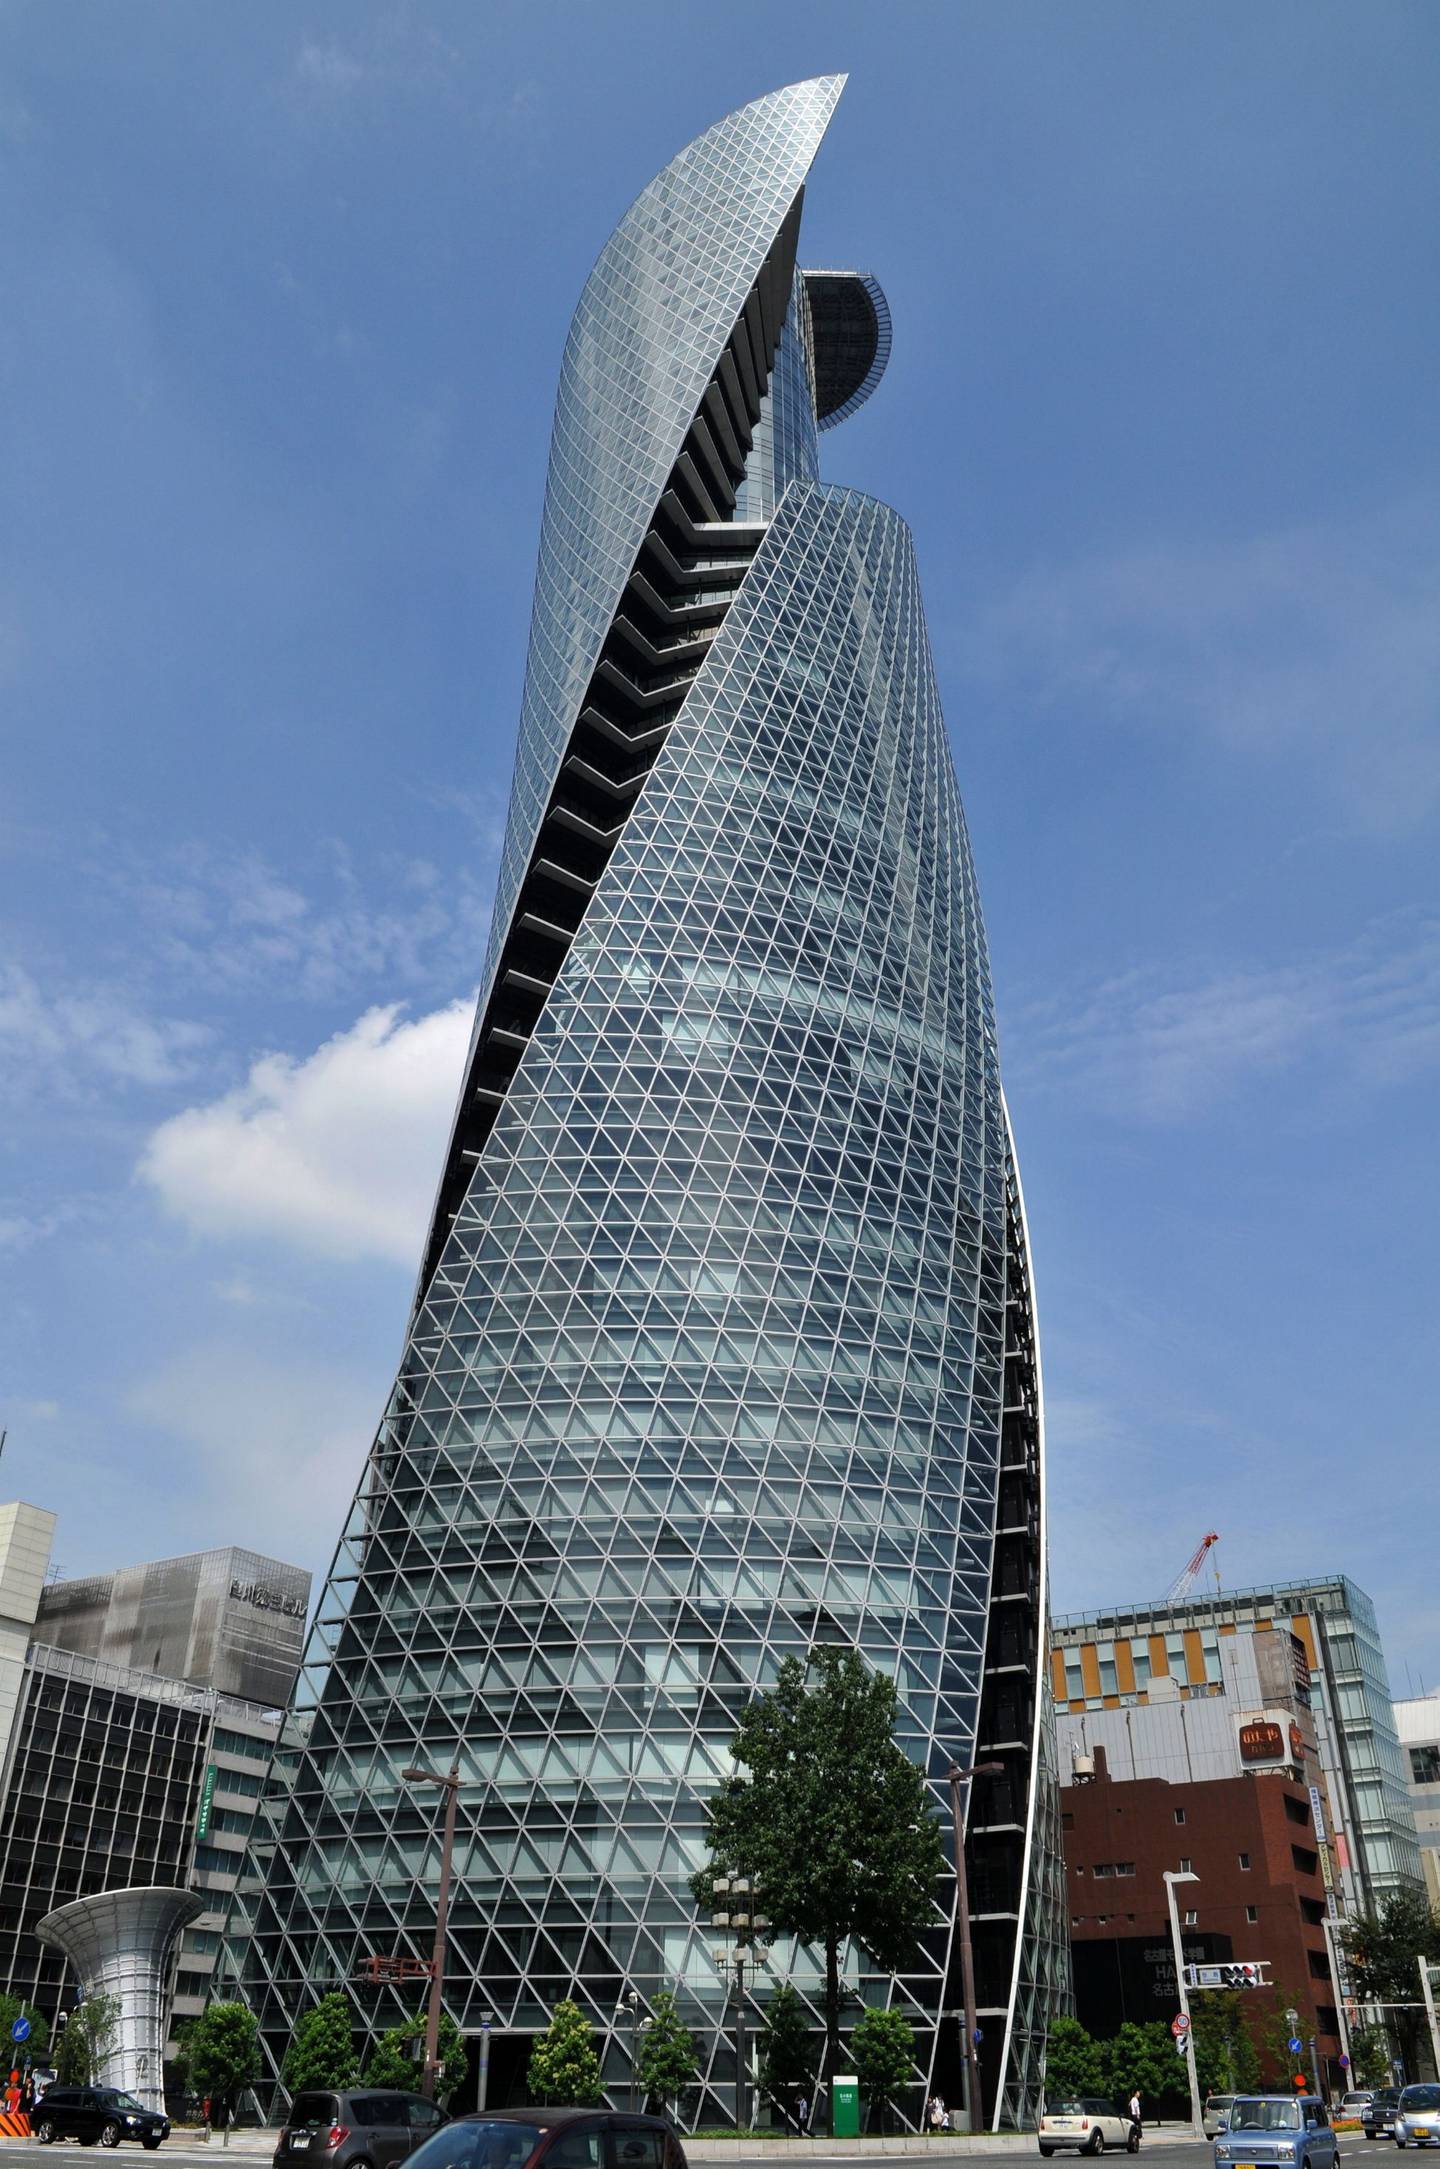 Japan's Mode Gakuen Spiral Towers have a double-glazed airflow window and natural ventilation system. Getty Images